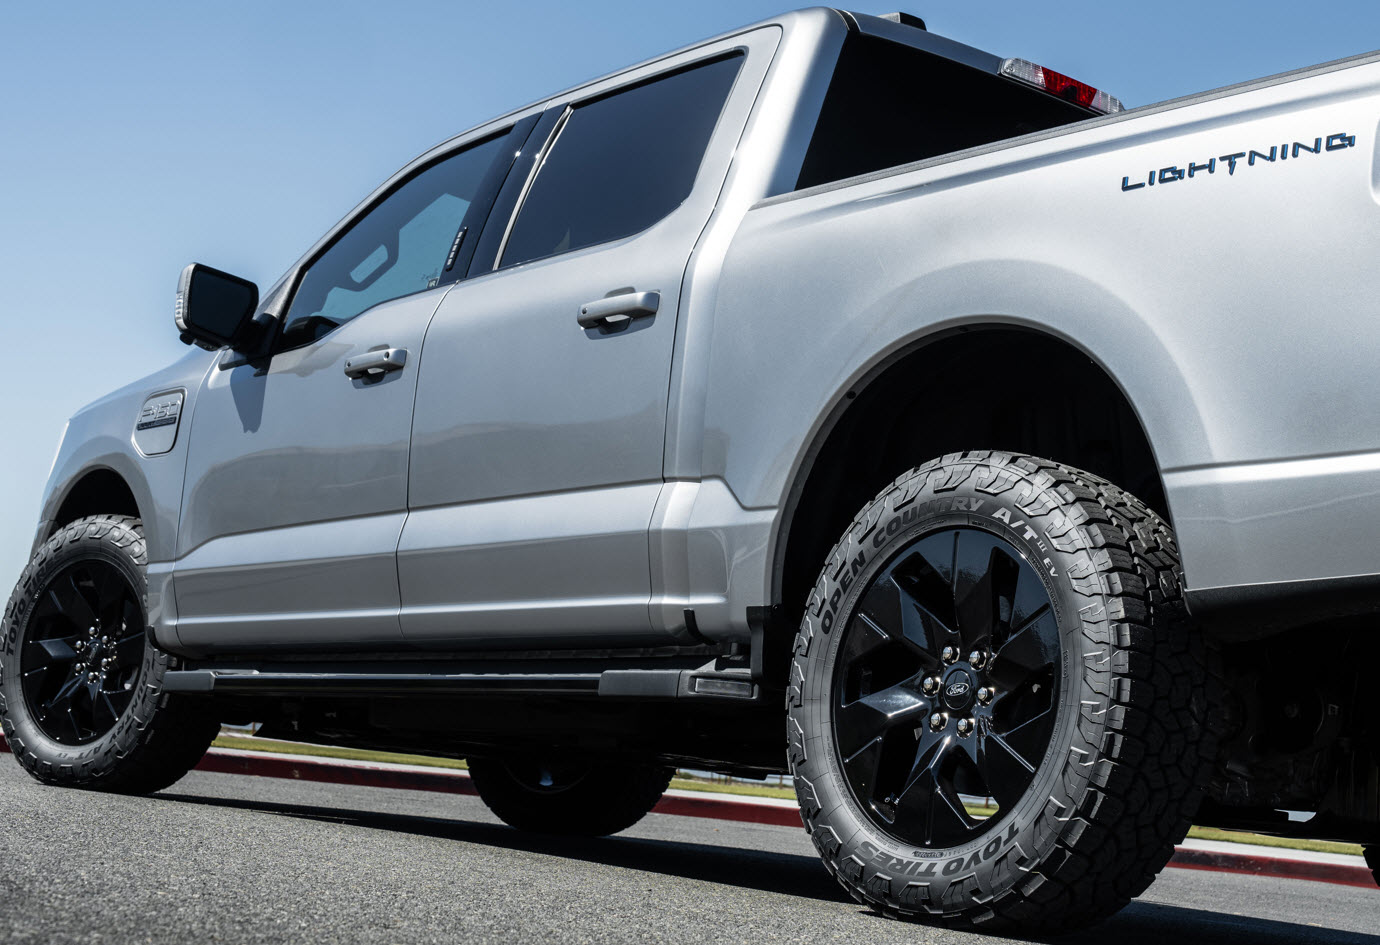 | EV EV A/T The Open Toyo Tires and | All-Terrain Country for SUVs. Tire III Trucks